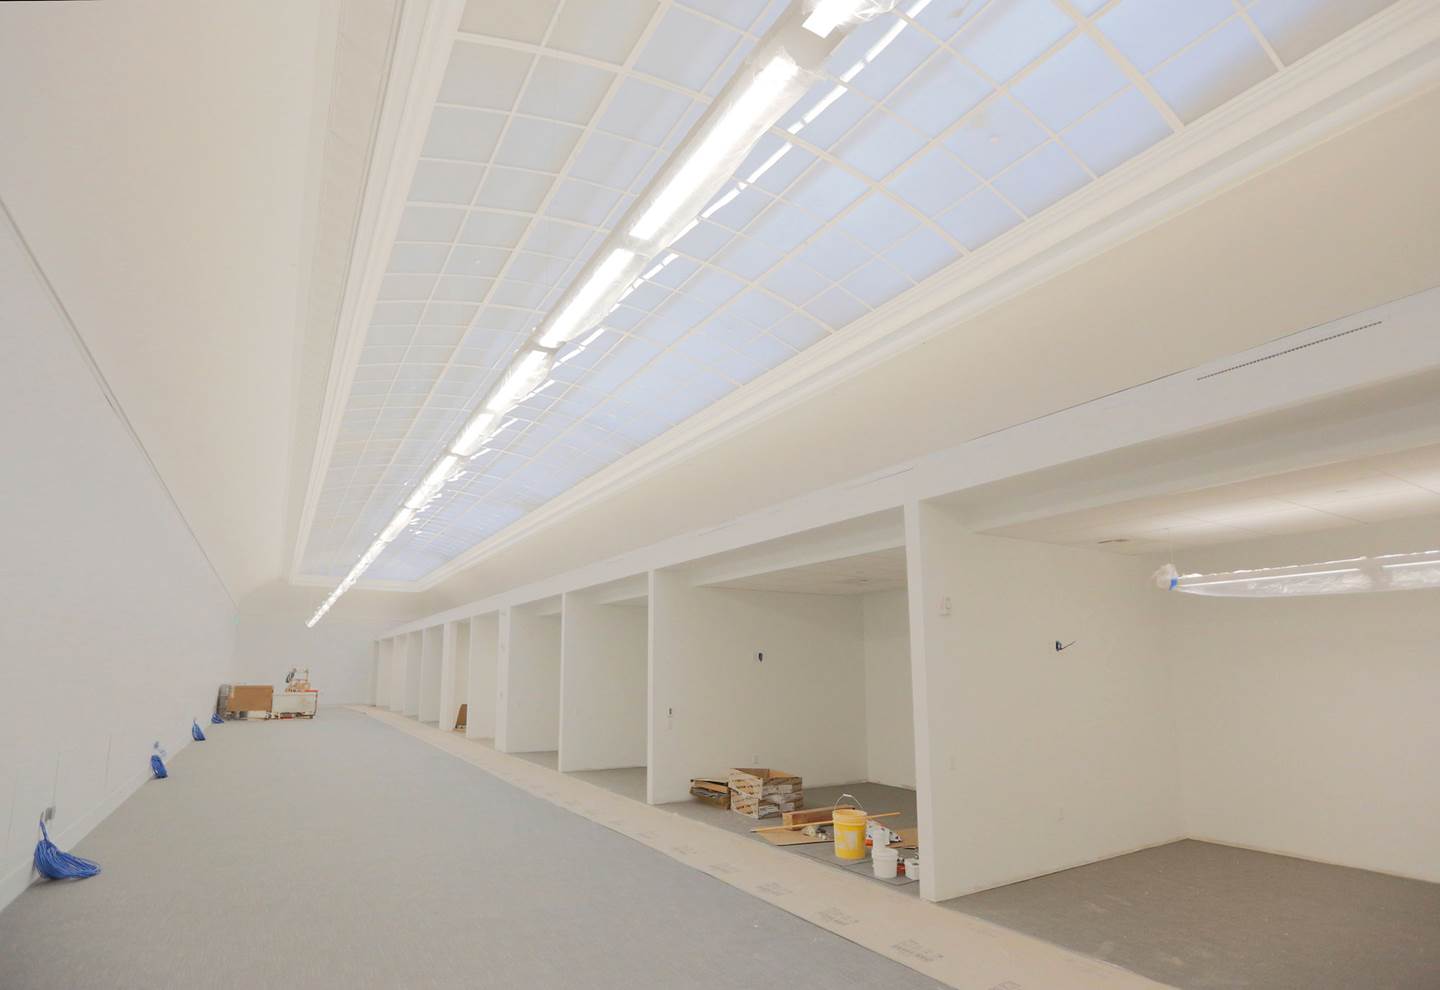 Large white room with glass ceiling with the frame of individual office walls up.